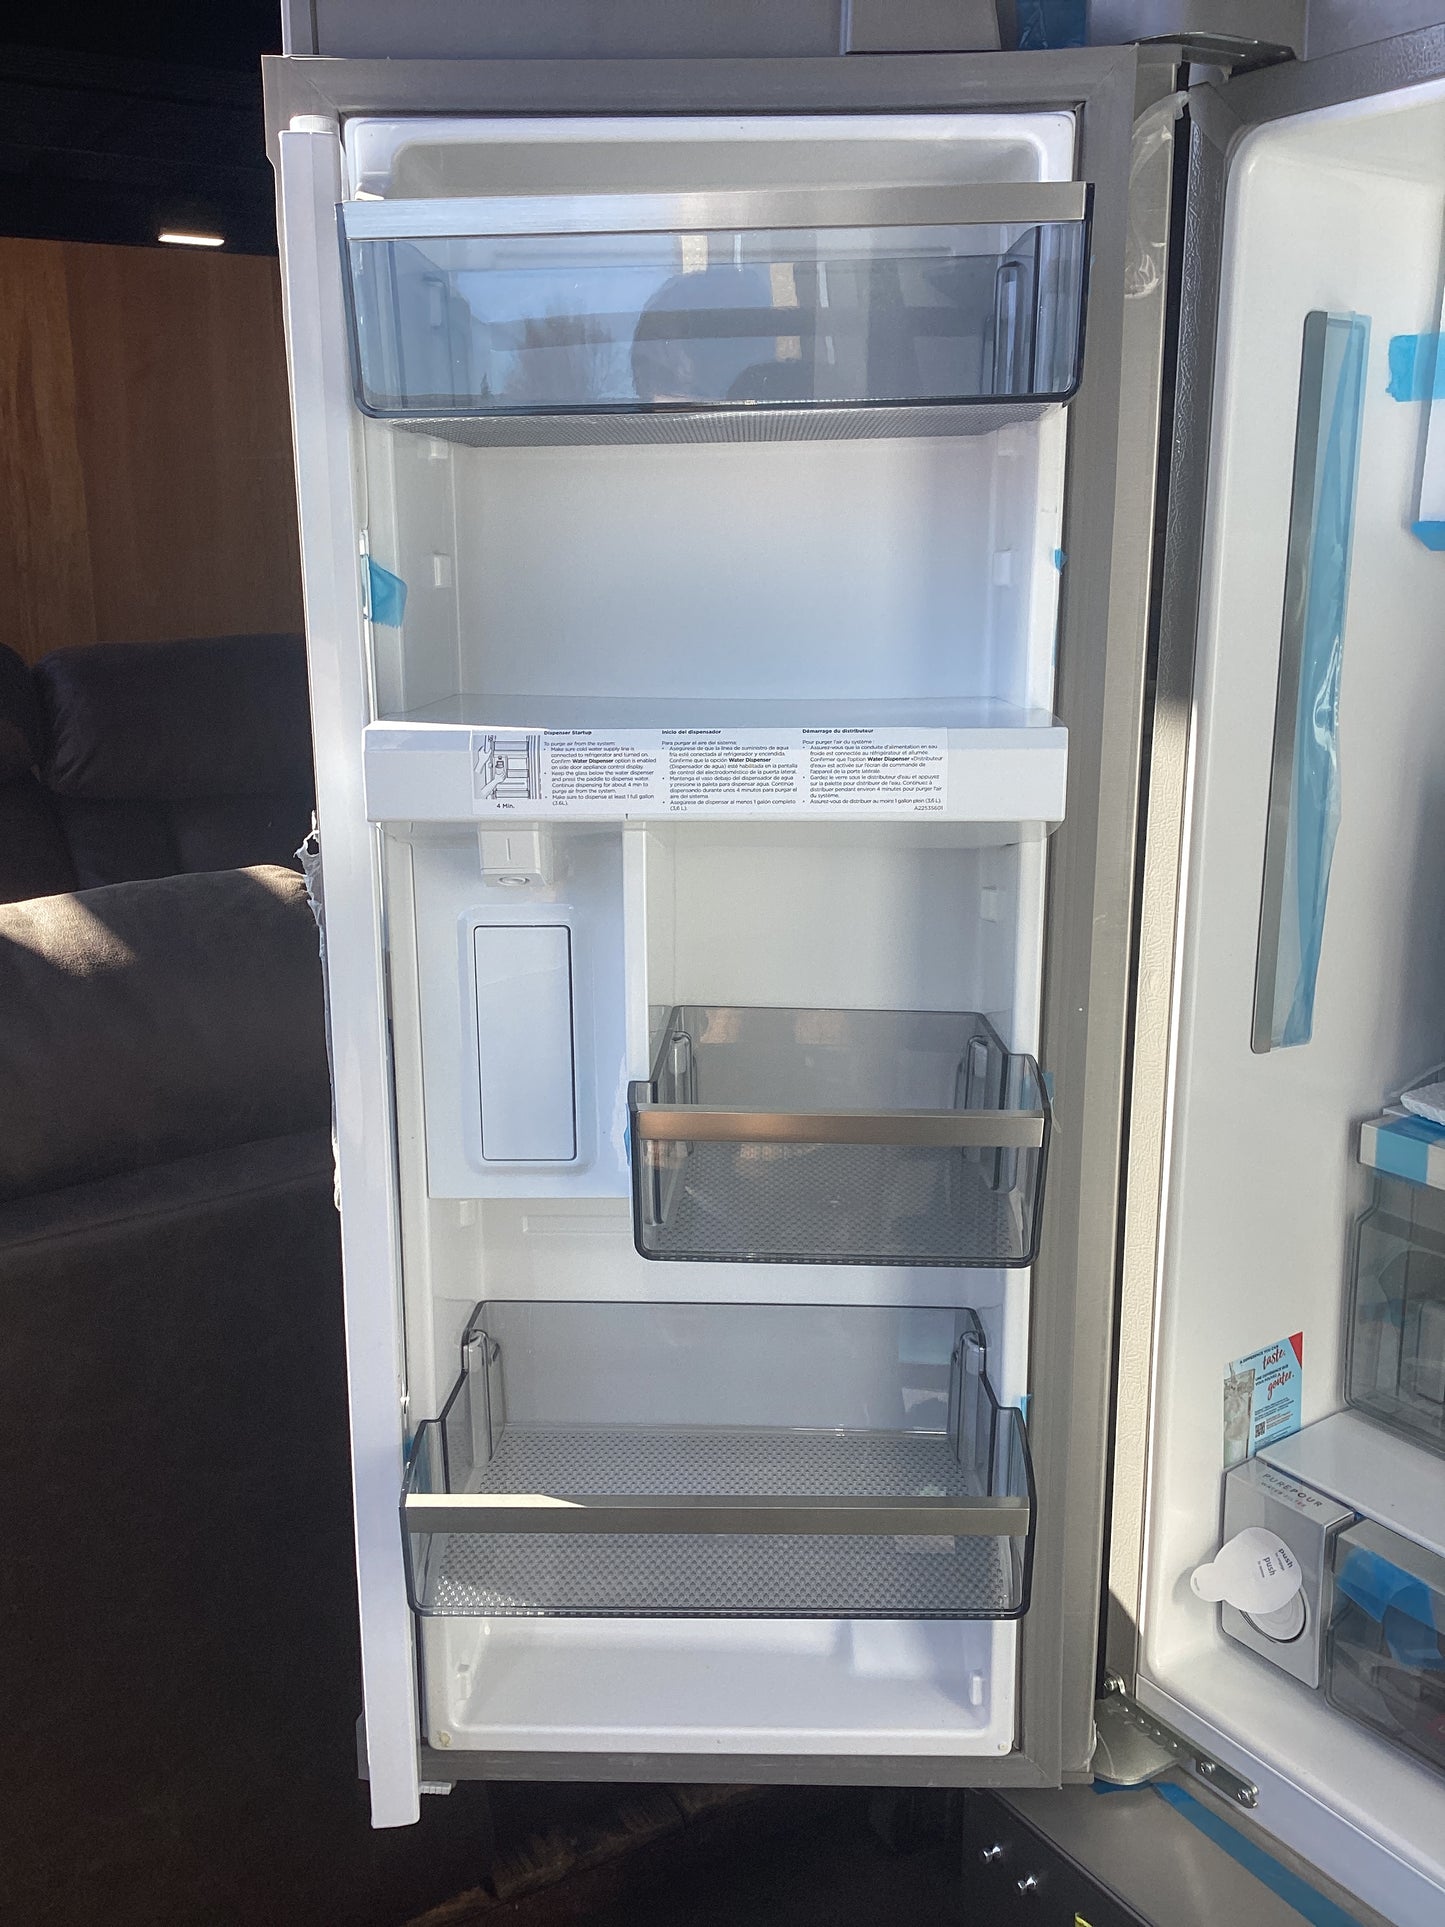 A refrigerator with open doors, showing shelves and compartments inside.